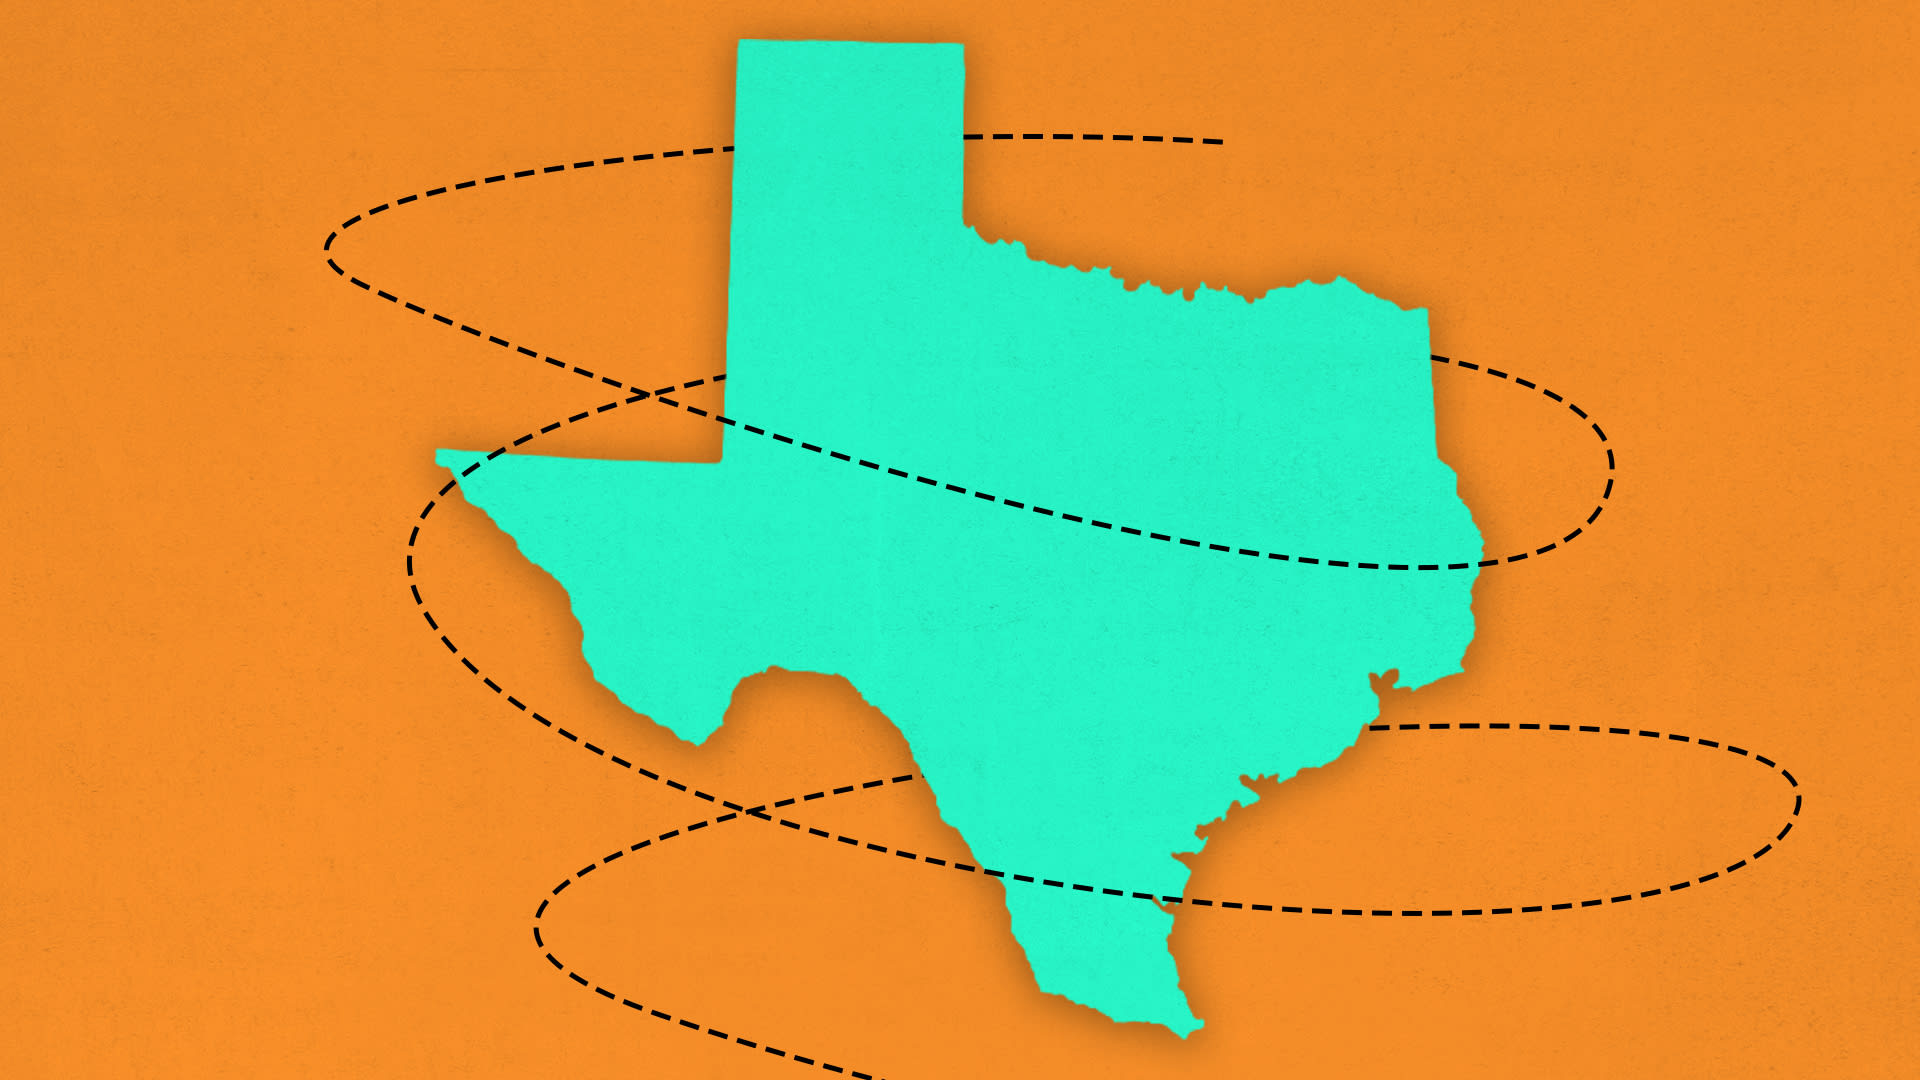 Staying in Texas. Fleeing New York. Here’s how and where people are moving during COVID-19